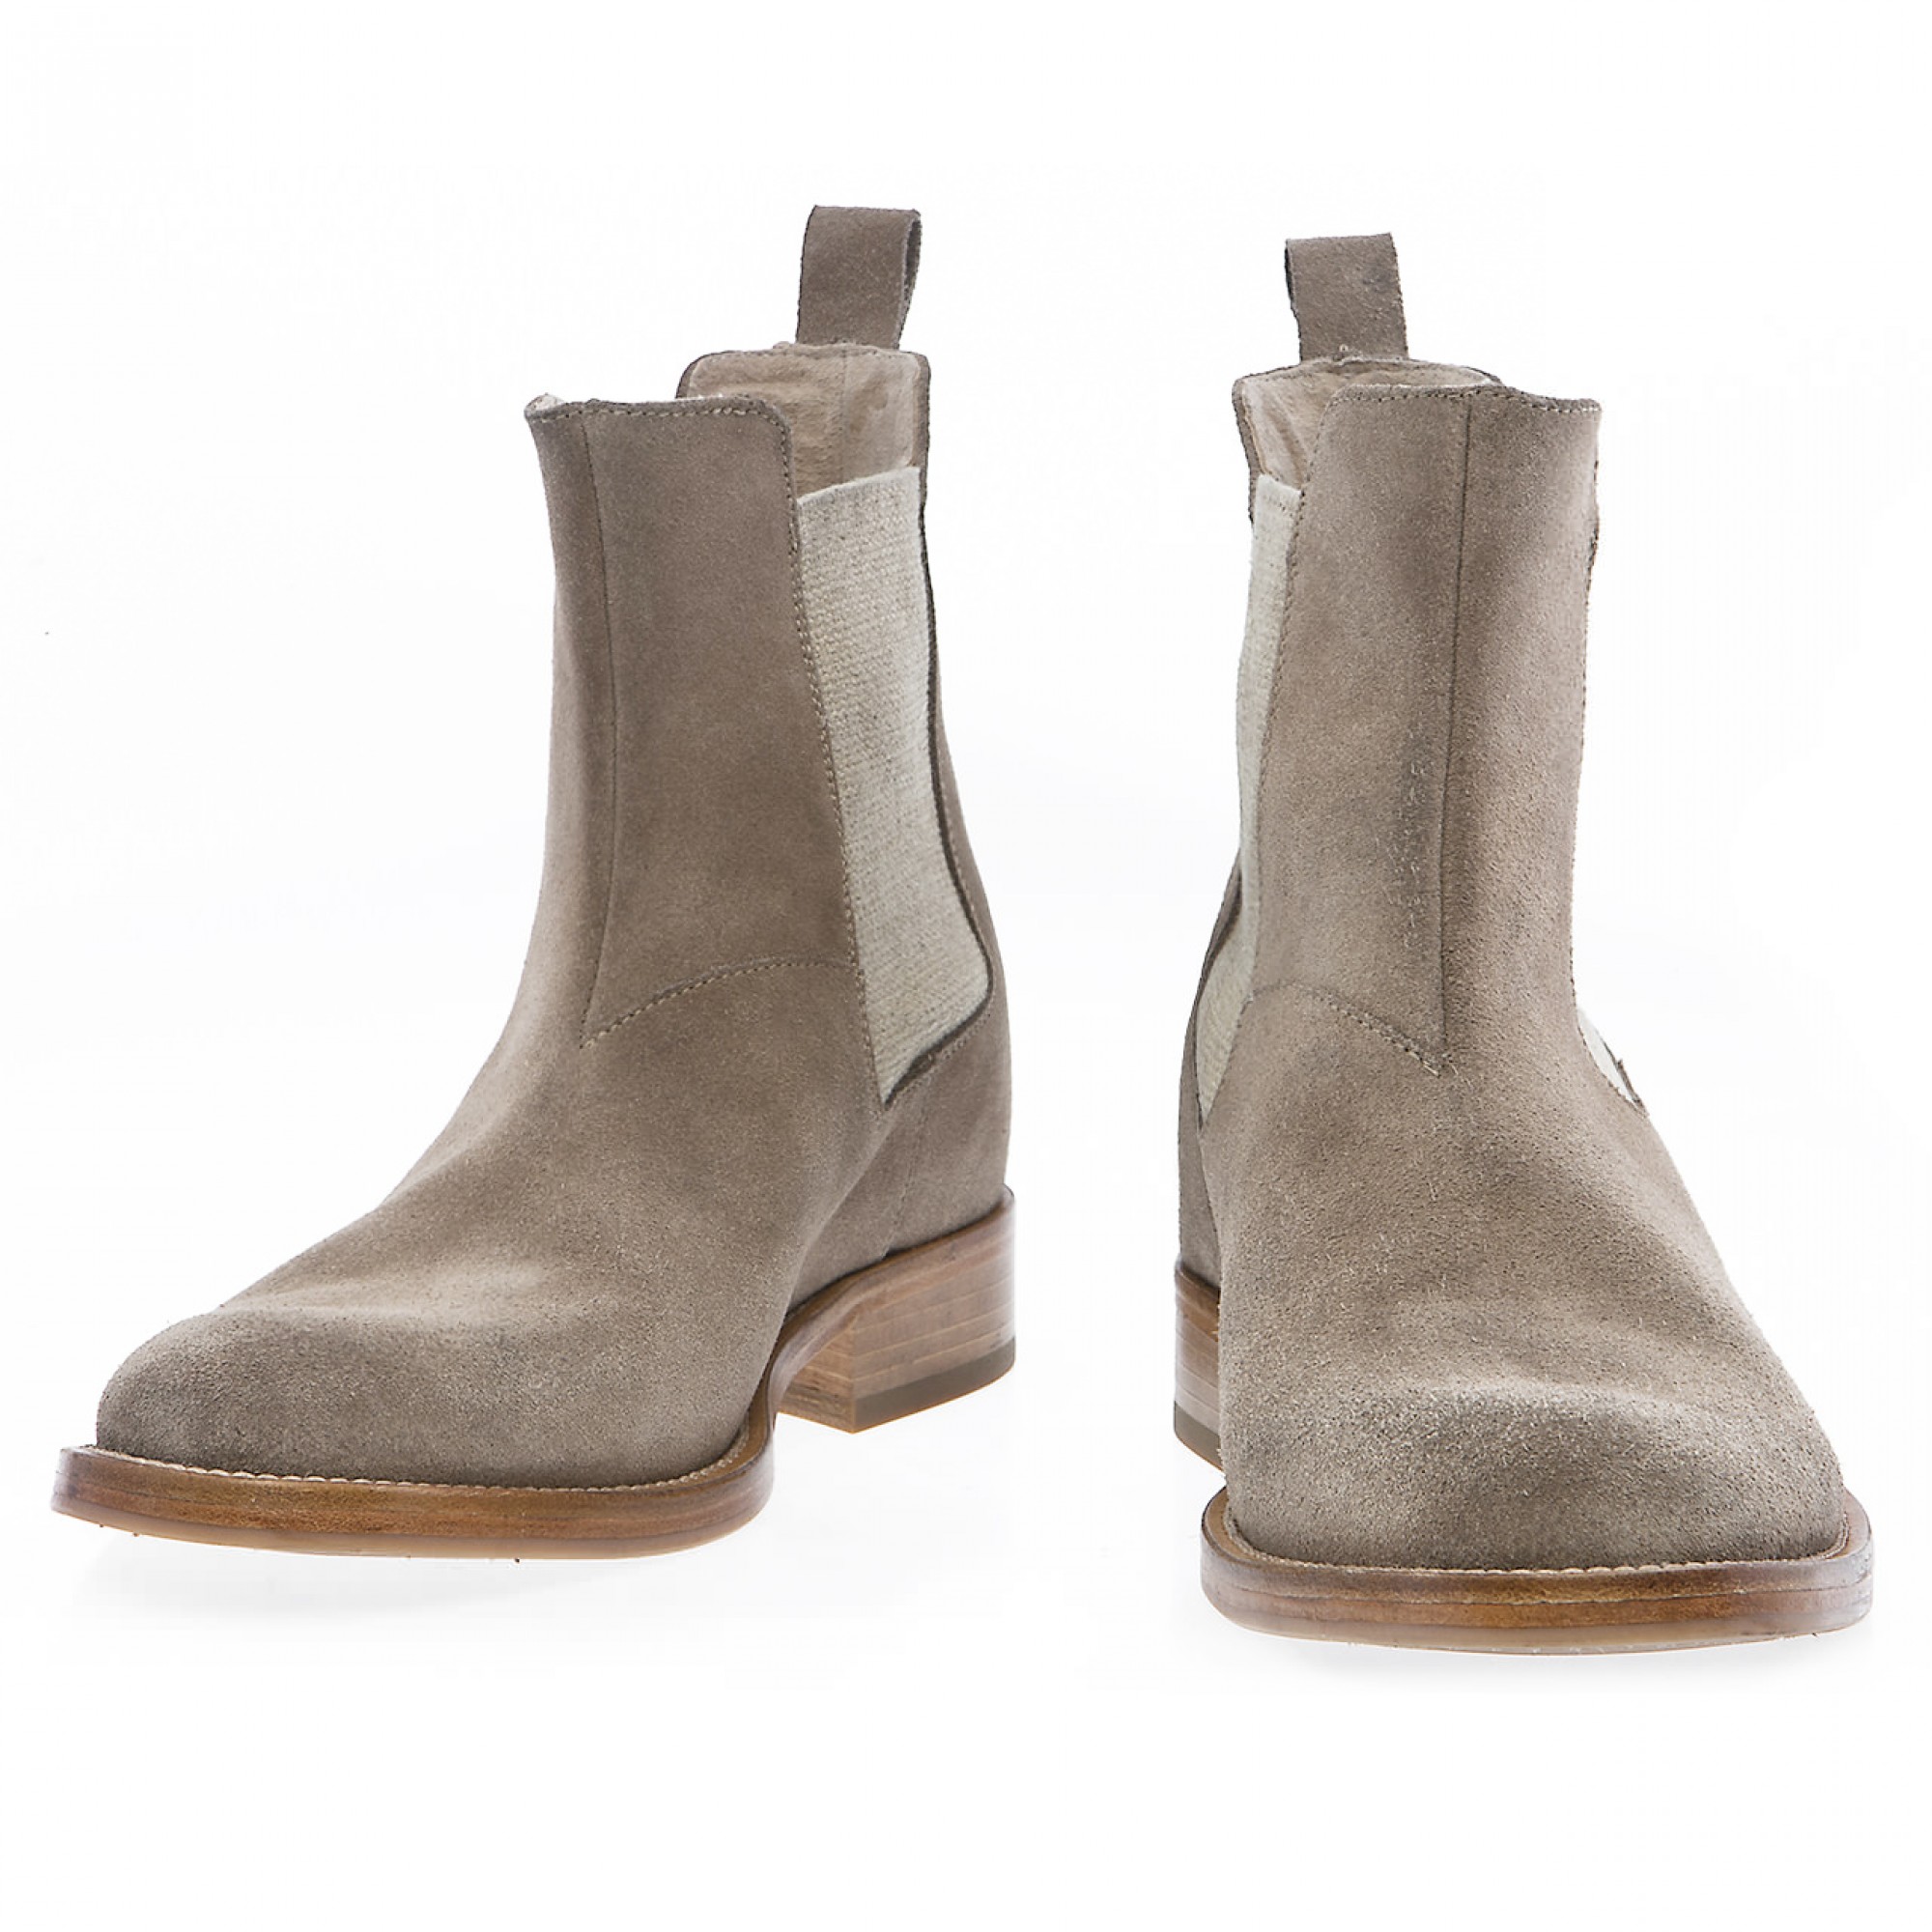 Chelsea Elevator Boots in Suede Leather from 2.4 to 3.1 inches